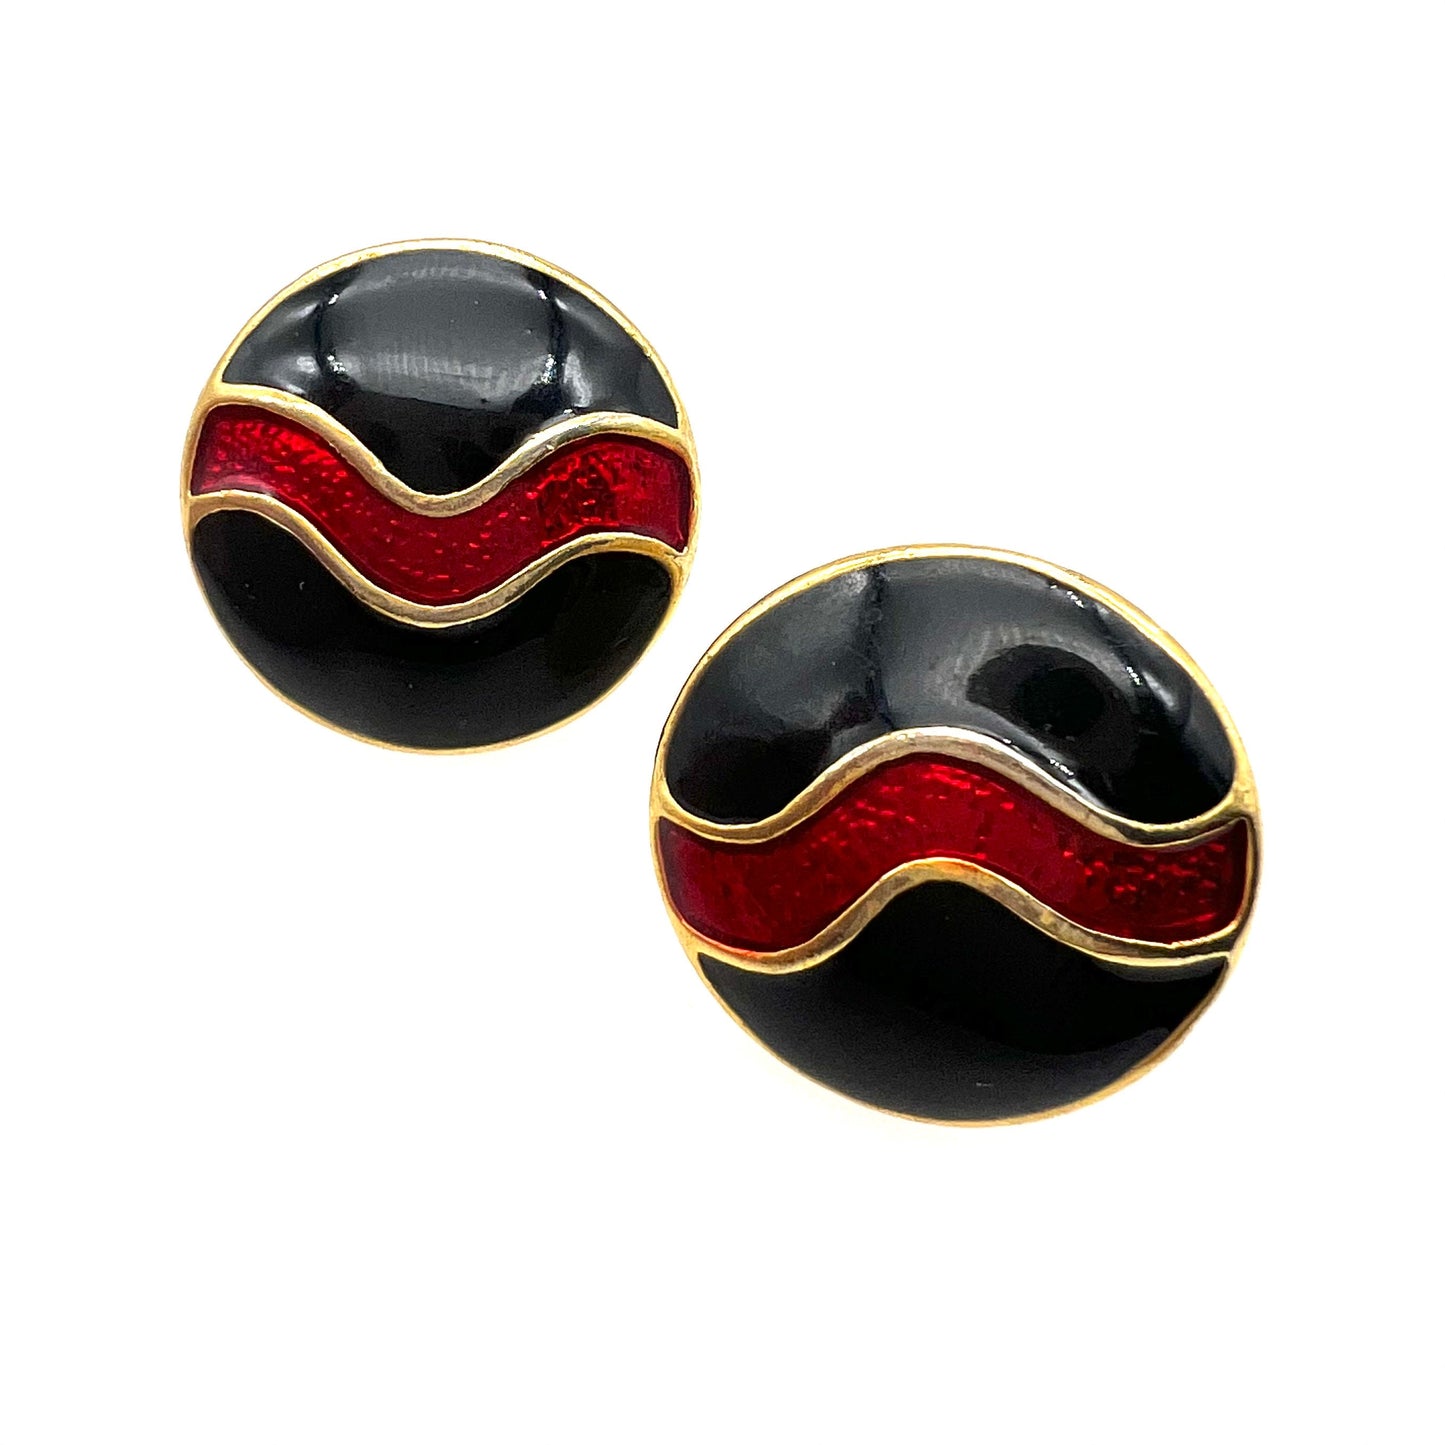 Signed 20832 Round Black and Red Enamel Pierced Earrings